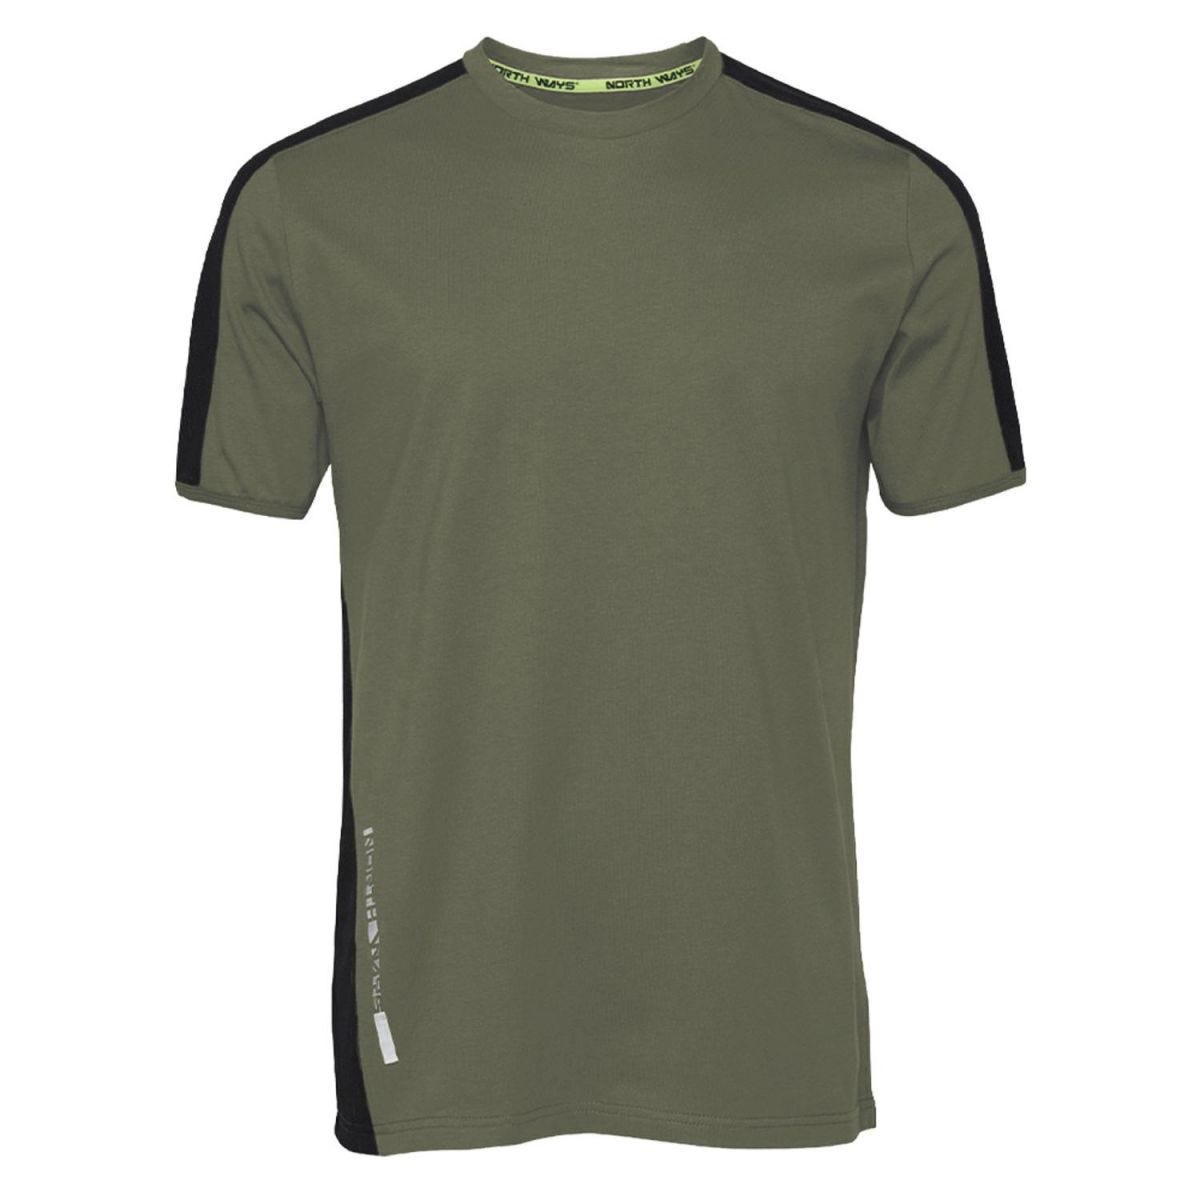 Tee-shirt à manches courtes pour homme Andy kaki - North Ways - Taille S 0